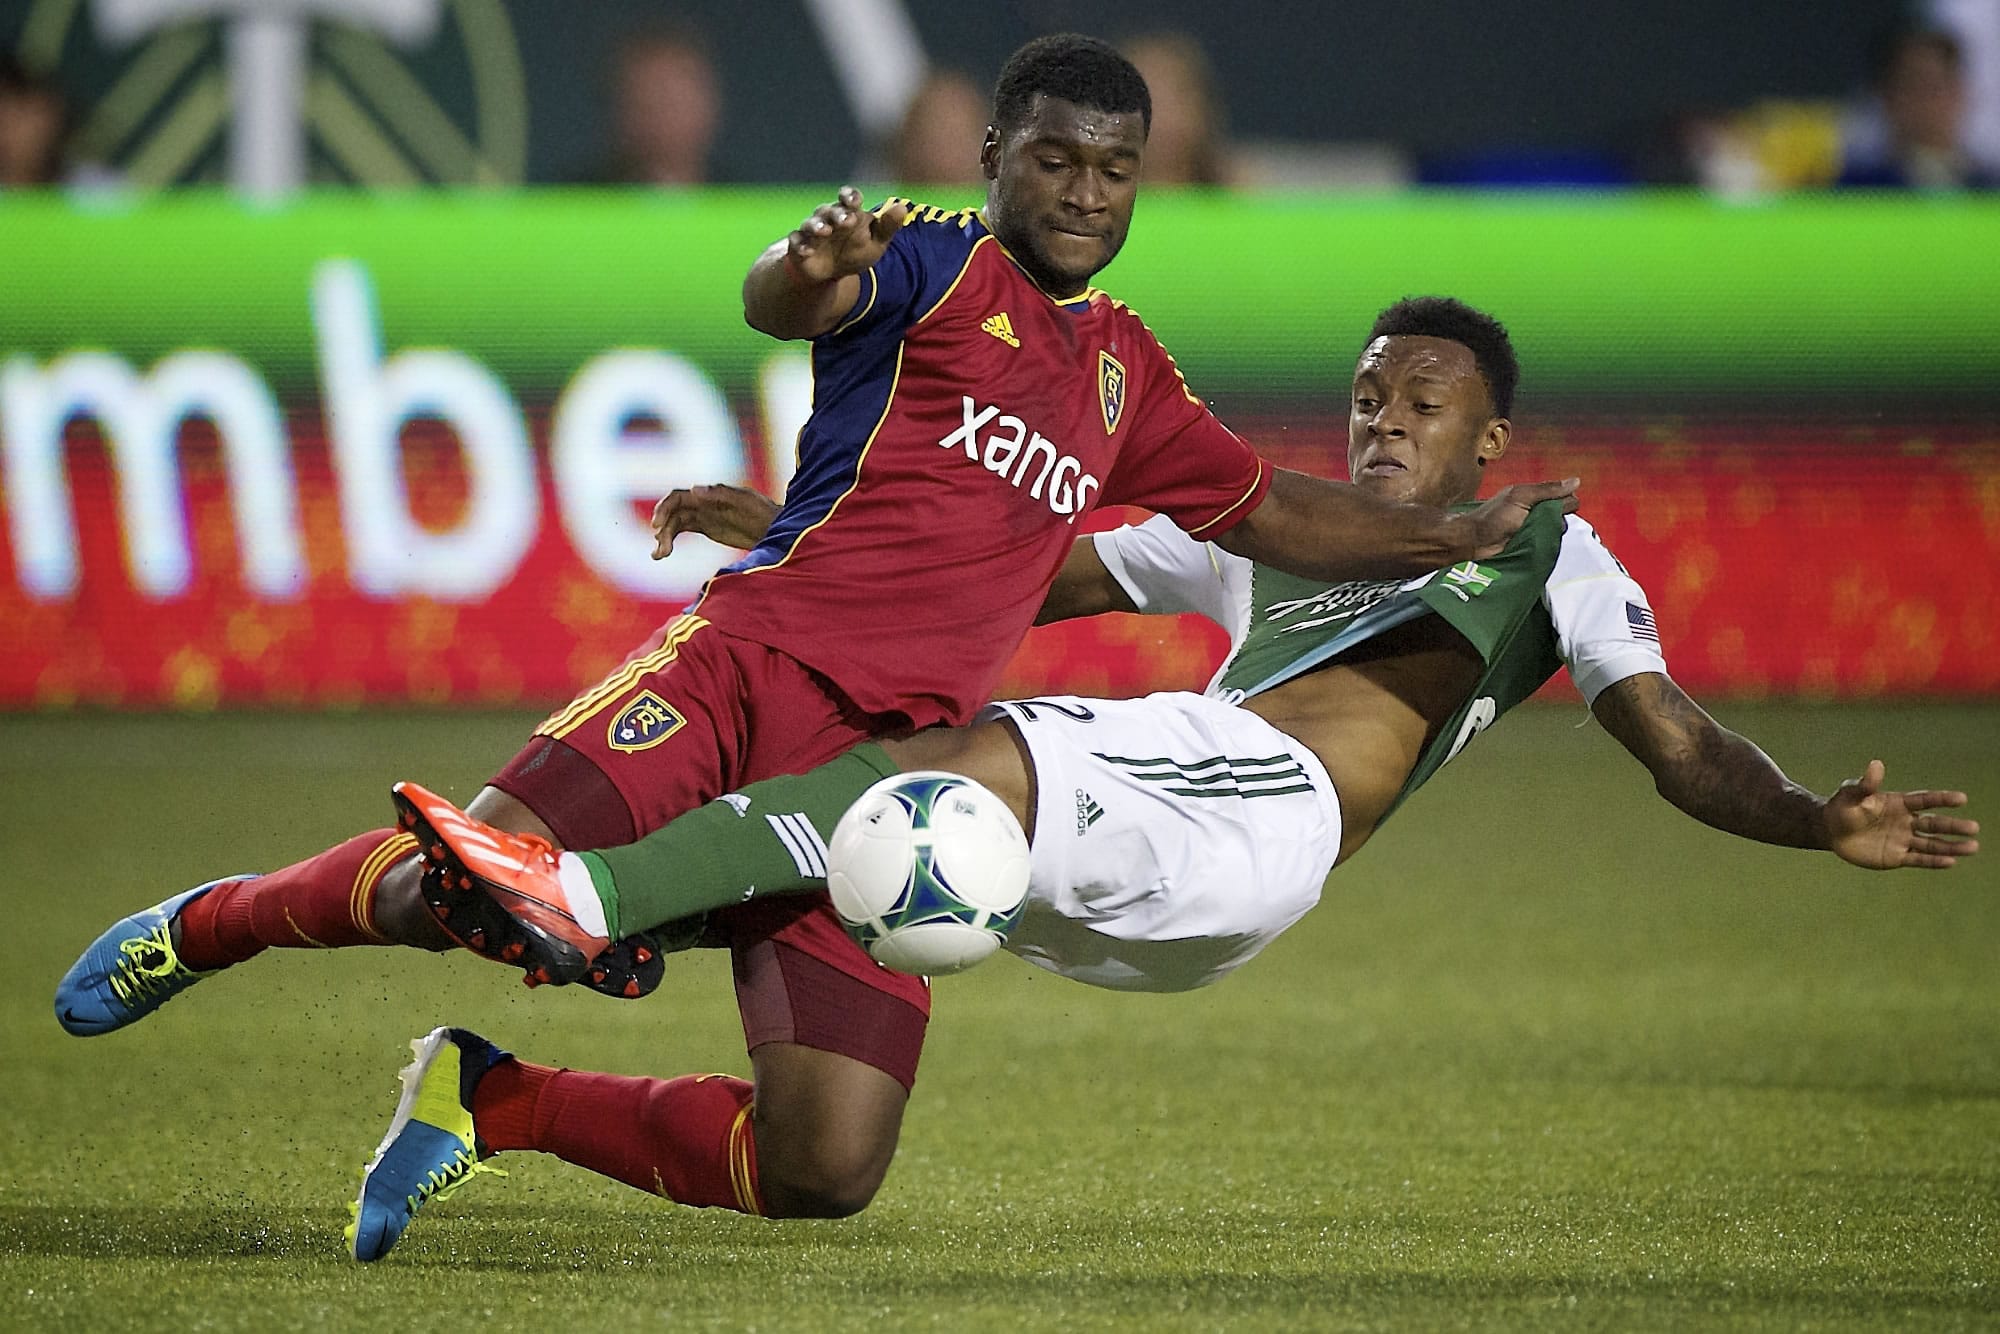 Brandon McDonald, left, of Real Salt Lake, battles Rodney Wallace of the Portland Timbers for control of the ball. Wallace scored a goal in the first half.